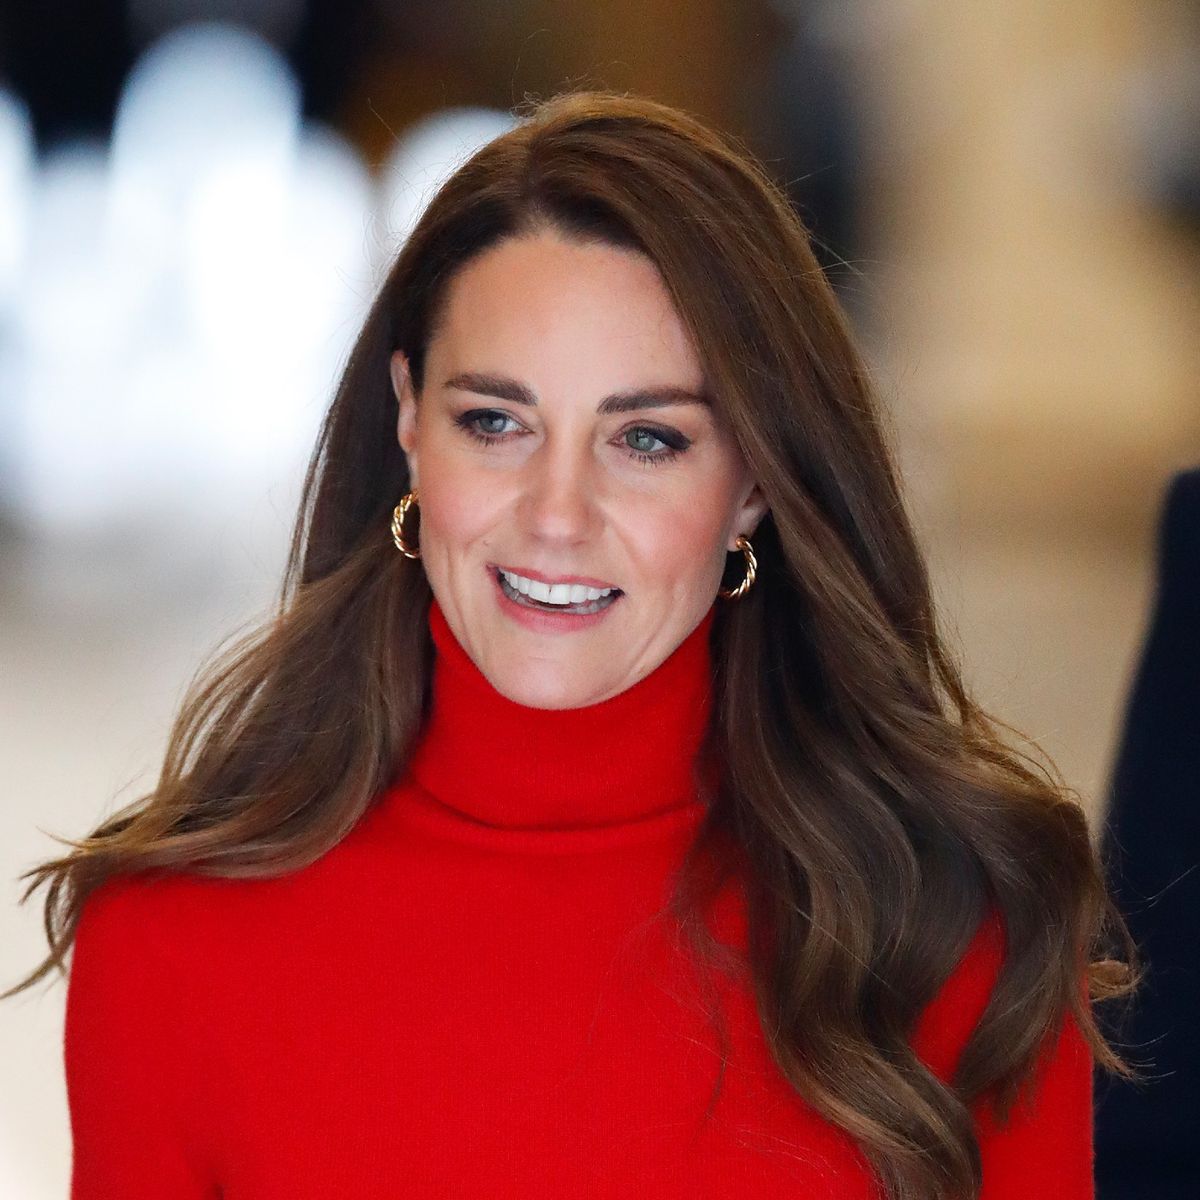 Kate Middleton’s Friends Describe Her as an Introvert Who Doesn’t Want ...